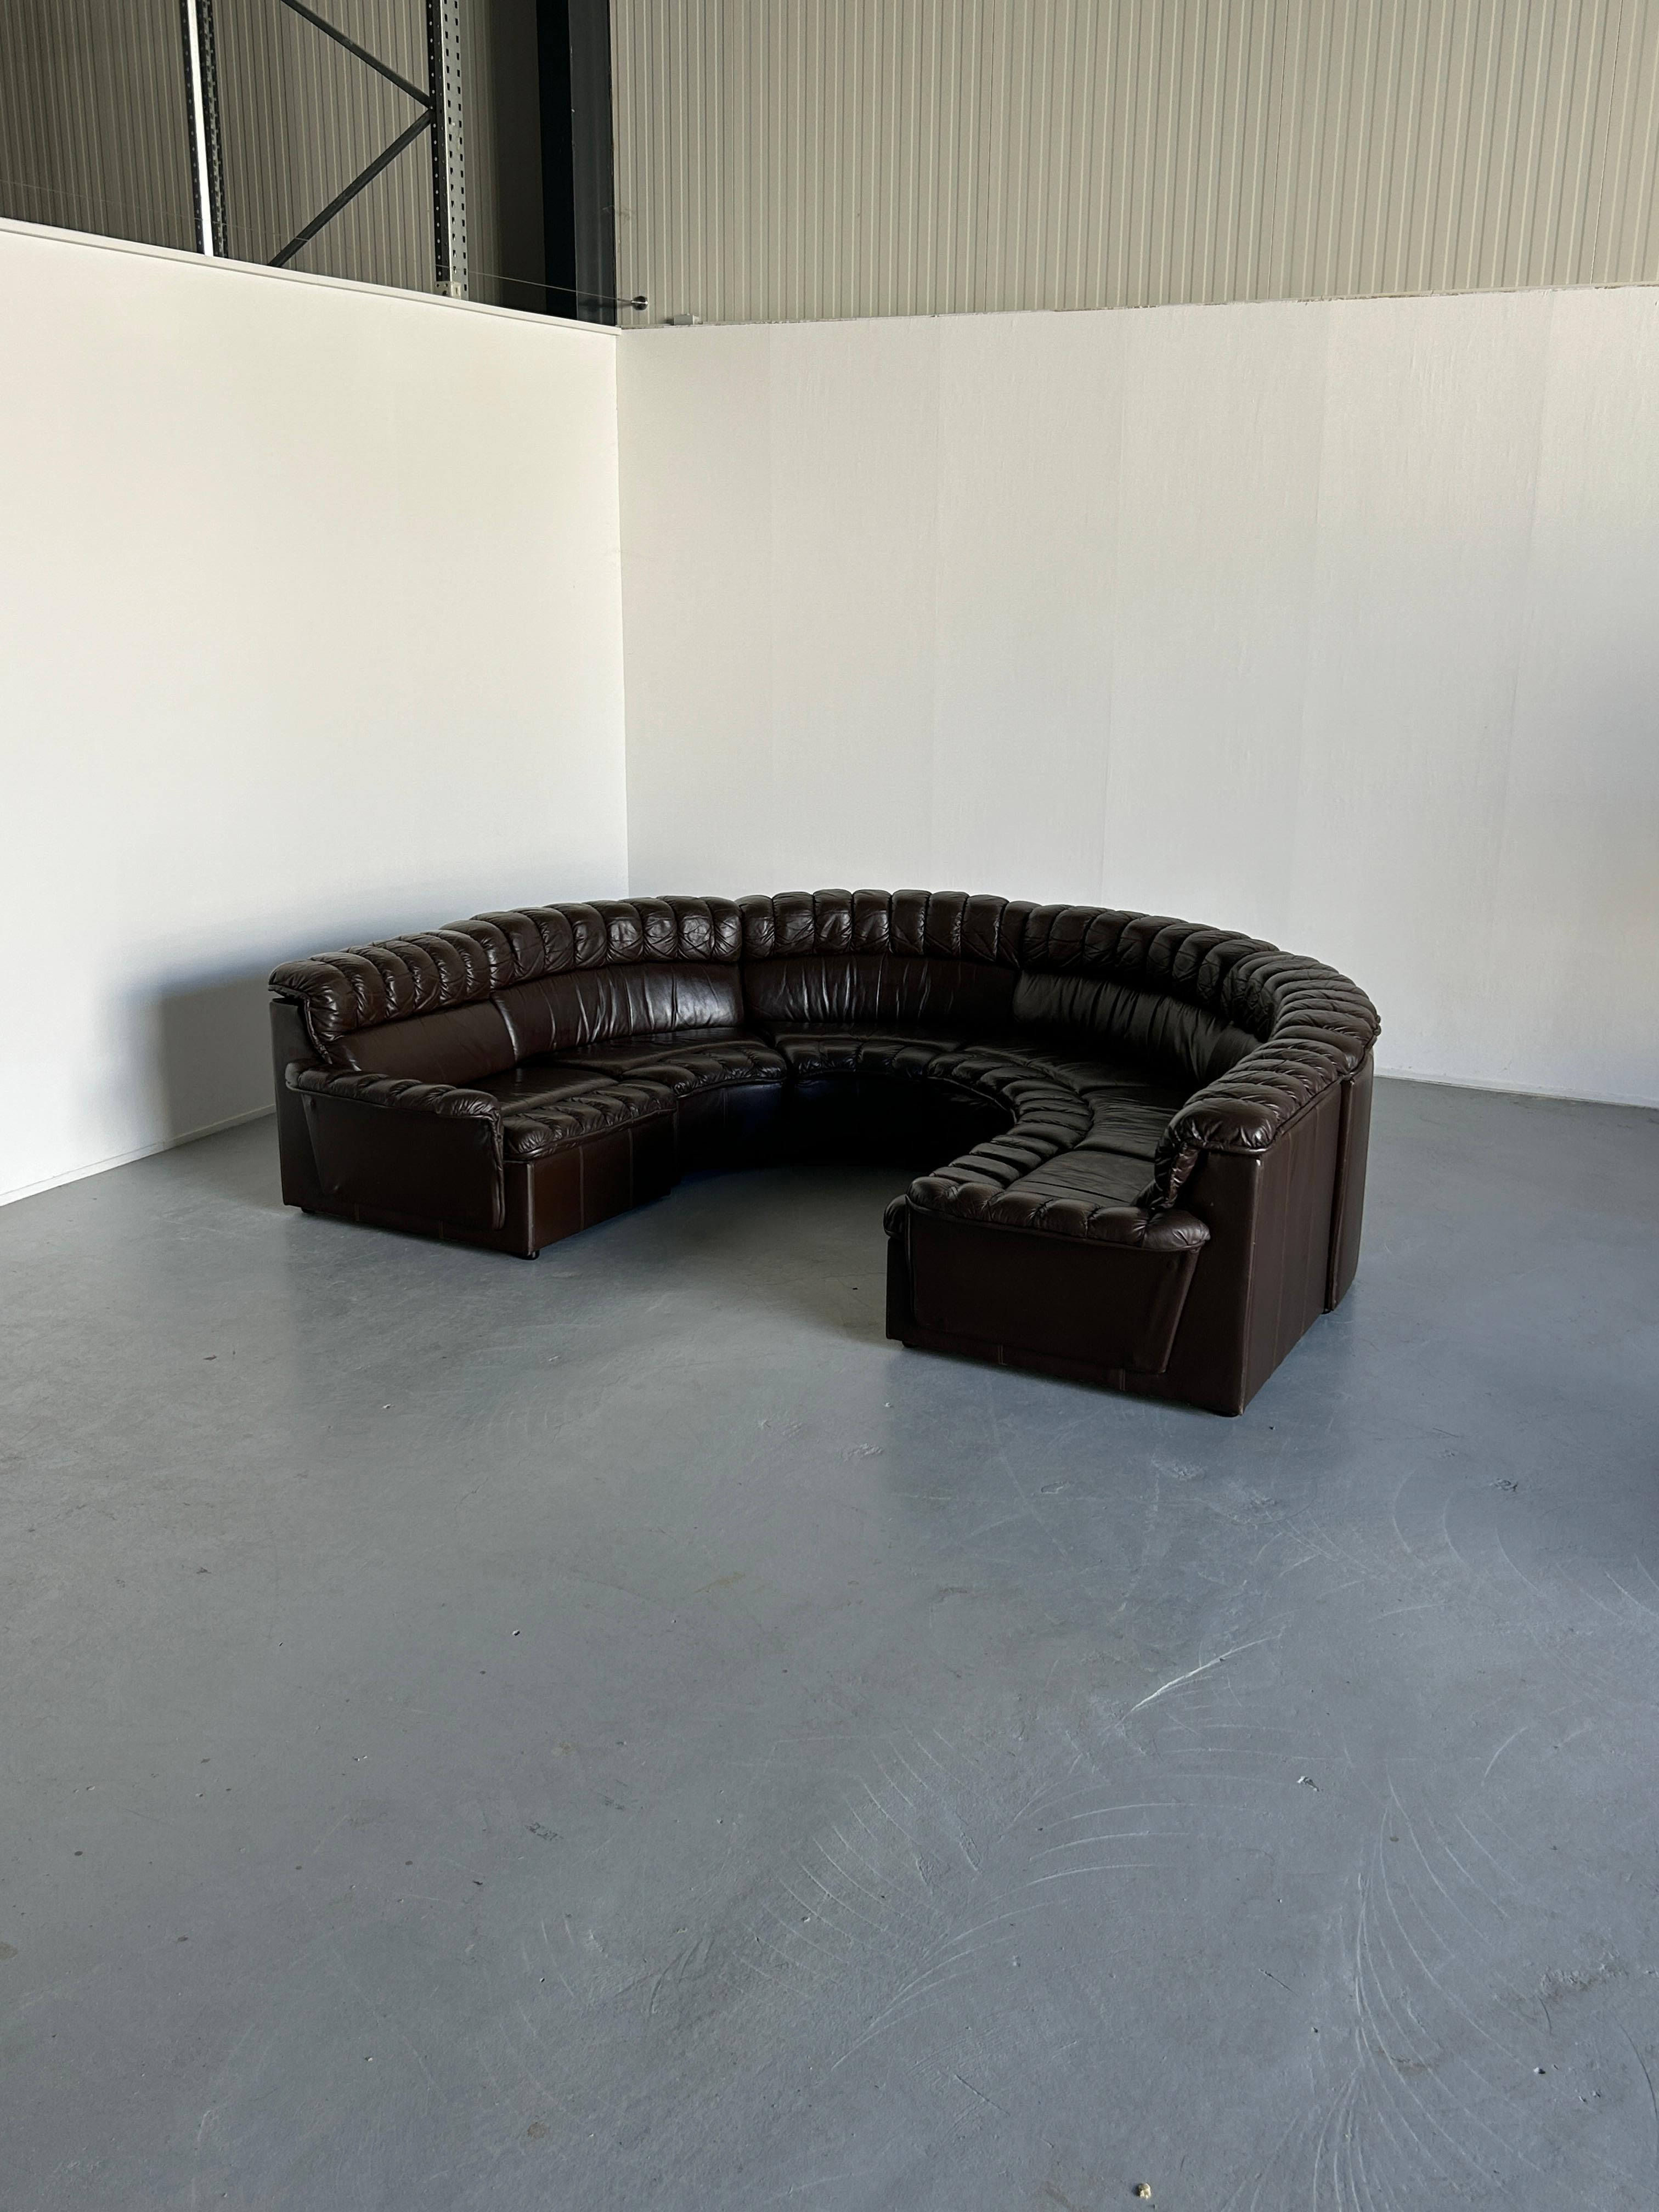 Mid-Century Modern Mid-Century-Modern Leather Snake Sofa in style of De Sede DS-600 Non-Stop, 1970s For Sale